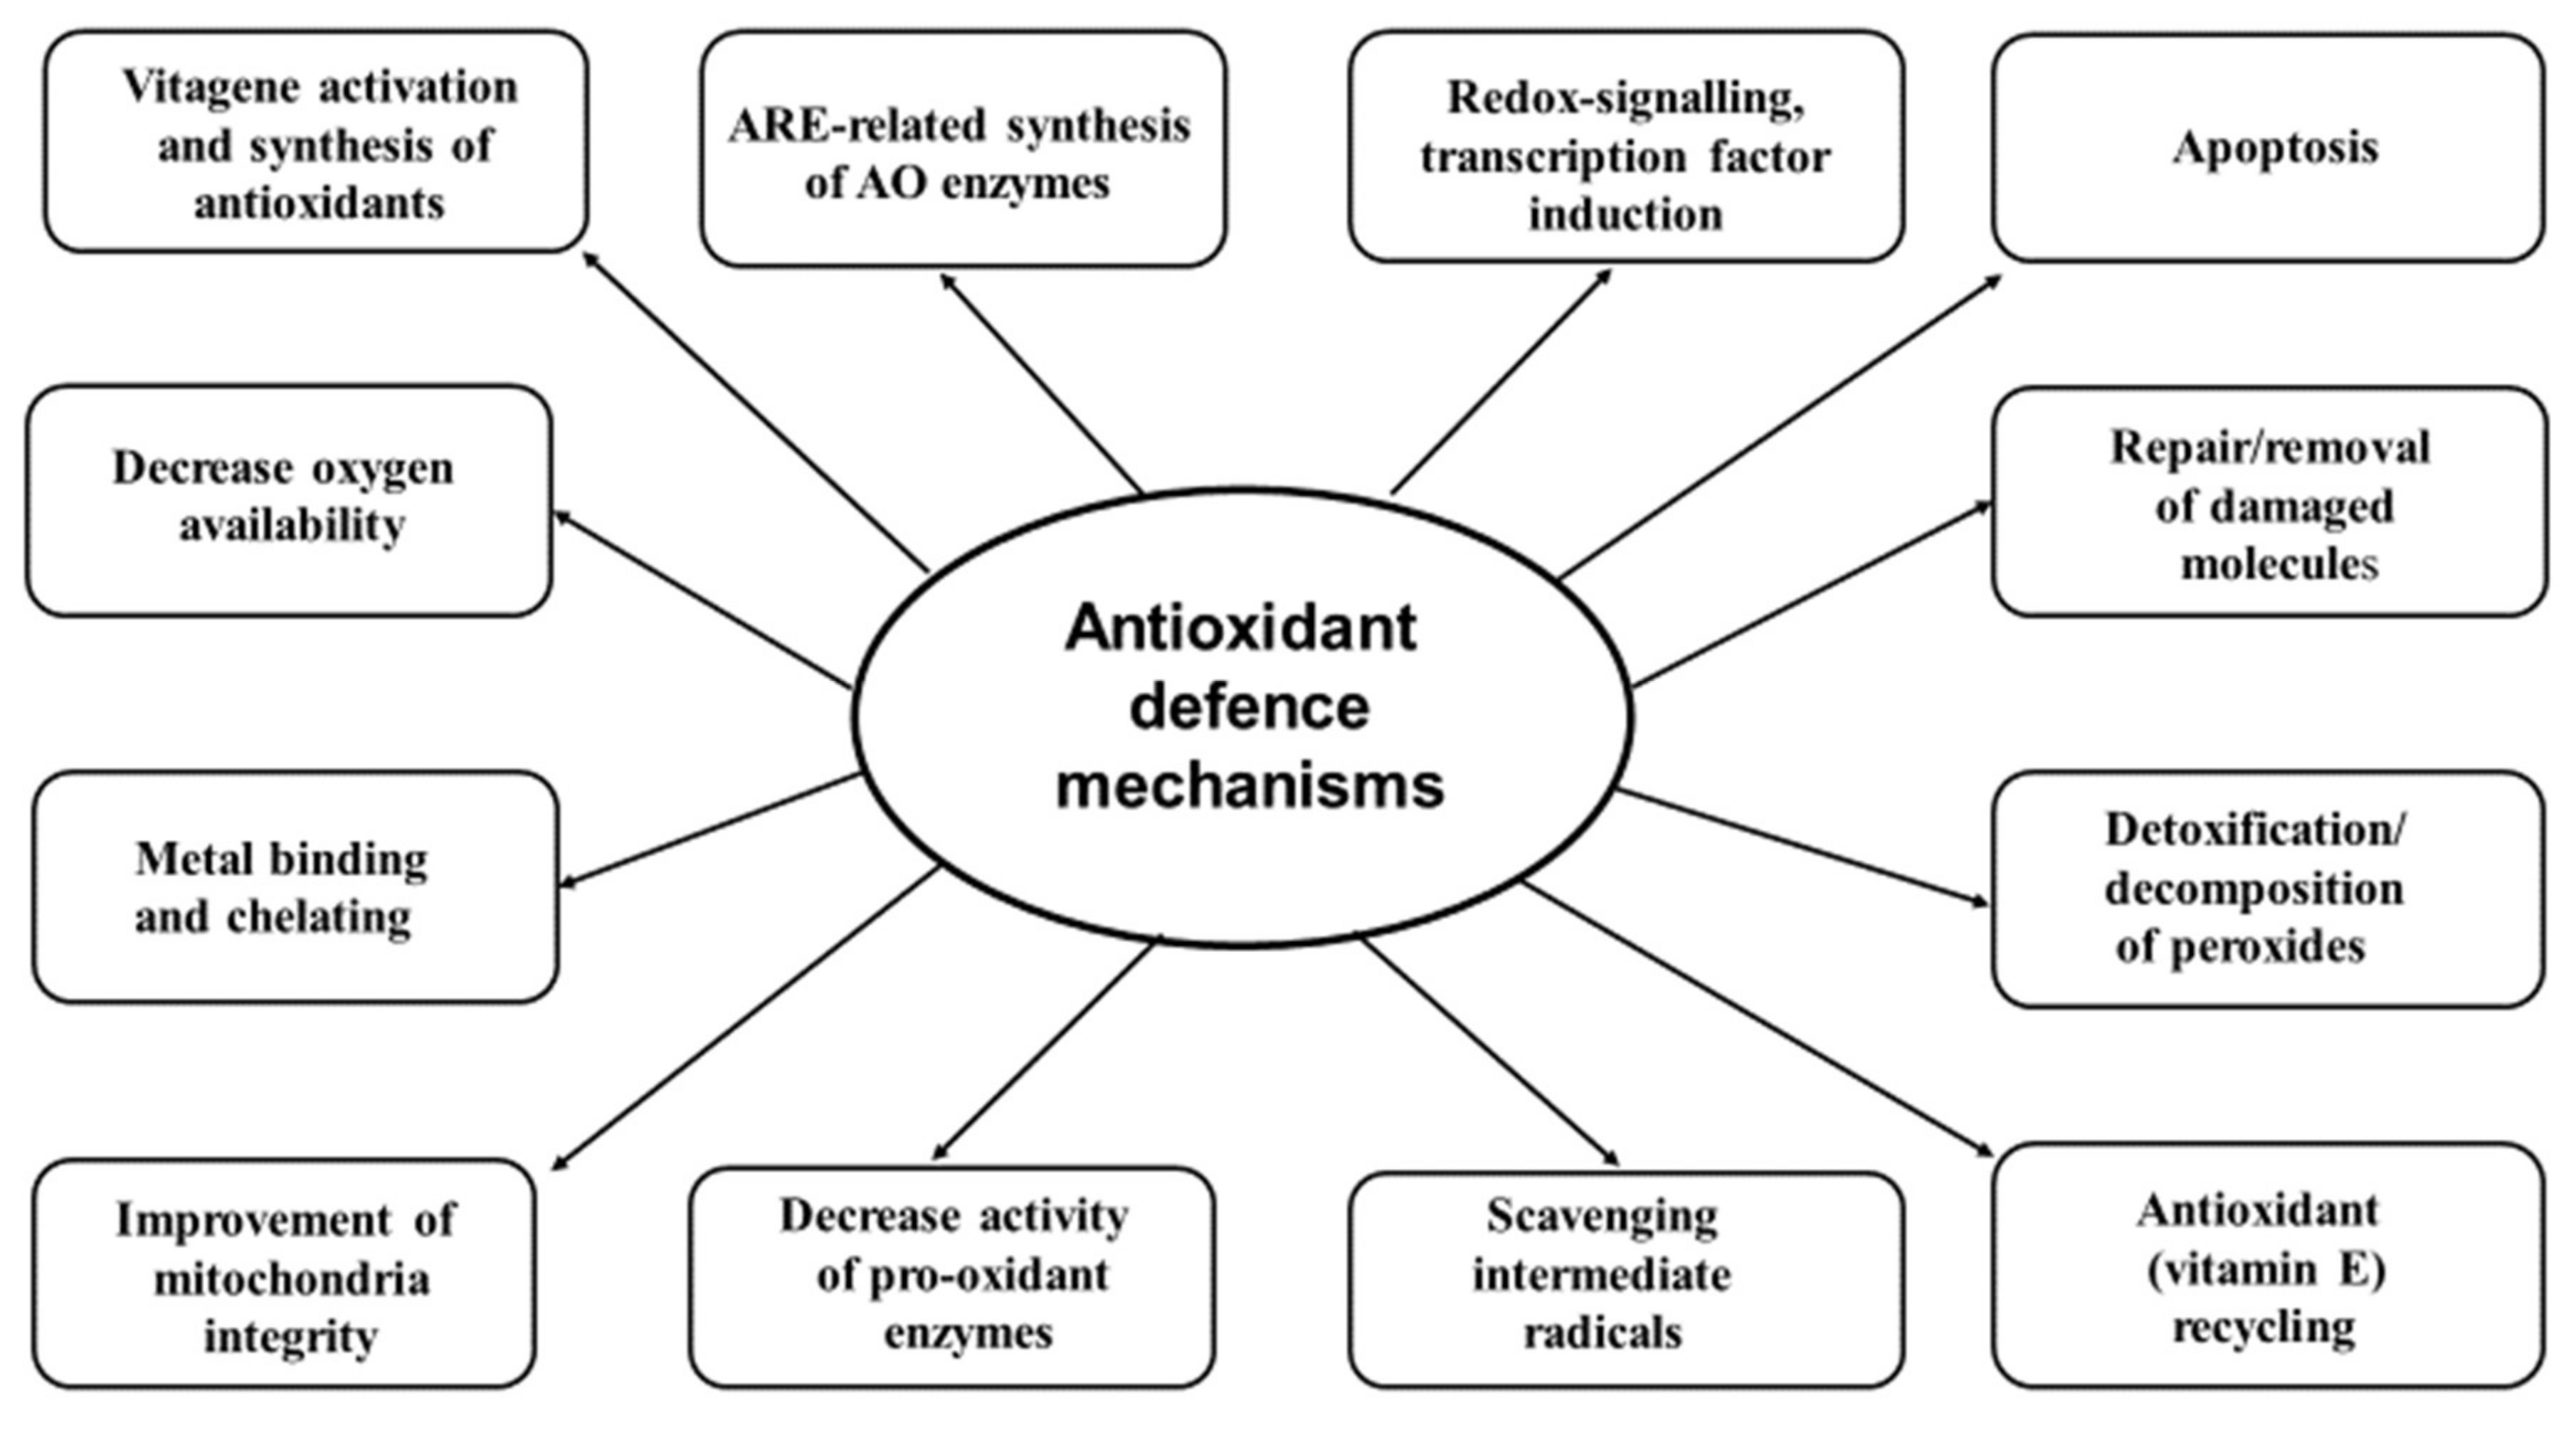 V. Selenium's Interaction with Other Antioxidant Enzymes